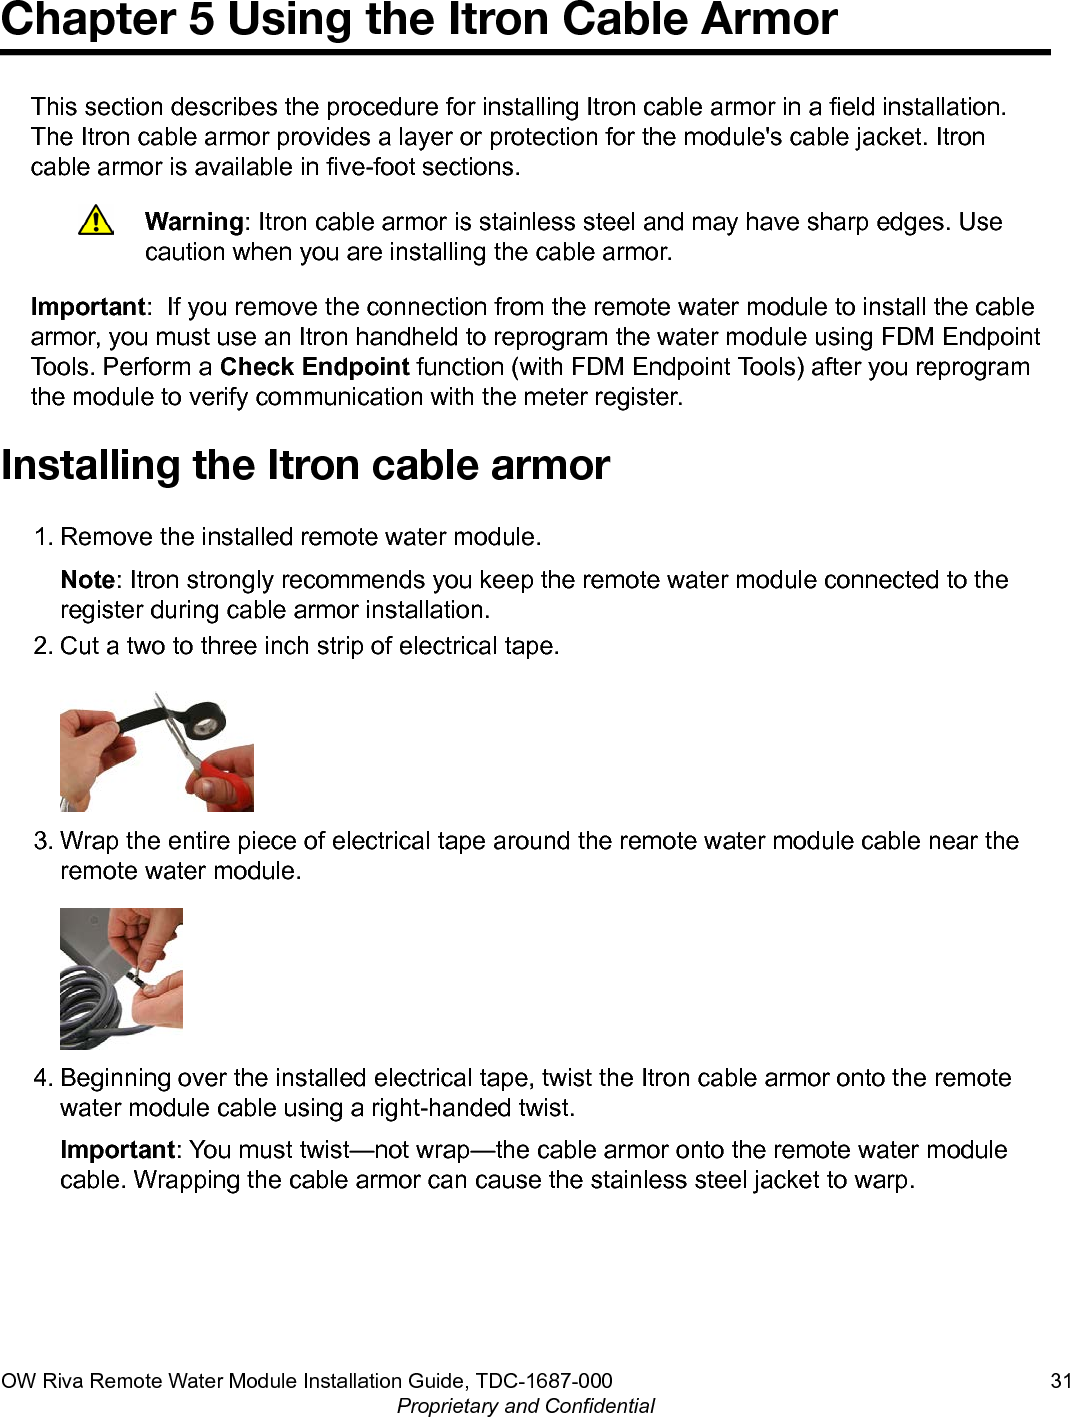 Chapter 5 Using the Itron Cable ArmorThis section describes the procedure for installing Itron cable armor in a field installation.The Itron cable armor provides a layer or protection for the module&apos;s cable jacket. Itroncable armor is available in five-foot sections.Warning: Itron cable armor is stainless steel and may have sharp edges. Usecaution when you are installing the cable armor.Important:  If you remove the connection from the remote water module to install the cablearmor, you must use an Itron handheld to reprogram the water module using FDM EndpointTools. Perform a Check Endpoint function (with FDM Endpoint Tools) after you reprogramthe module to verify communication with the meter register.Installing the Itron cable armor1. Remove the installed remote water module.Note: Itron strongly recommends you keep the remote water module connected to theregister during cable armor installation.2. Cut a two to three inch strip of electrical tape.3. Wrap the entire piece of electrical tape around the remote water module cable near theremote water module.4. Beginning over the installed electrical tape, twist the Itron cable armor onto the remotewater module cable using a right-handed twist.Important: You must twist—not wrap—the cable armor onto the remote water modulecable. Wrapping the cable armor can cause the stainless steel jacket to warp.OW Riva Remote Water Module Installation Guide, TDC-1687-000 31Proprietary and Confidential